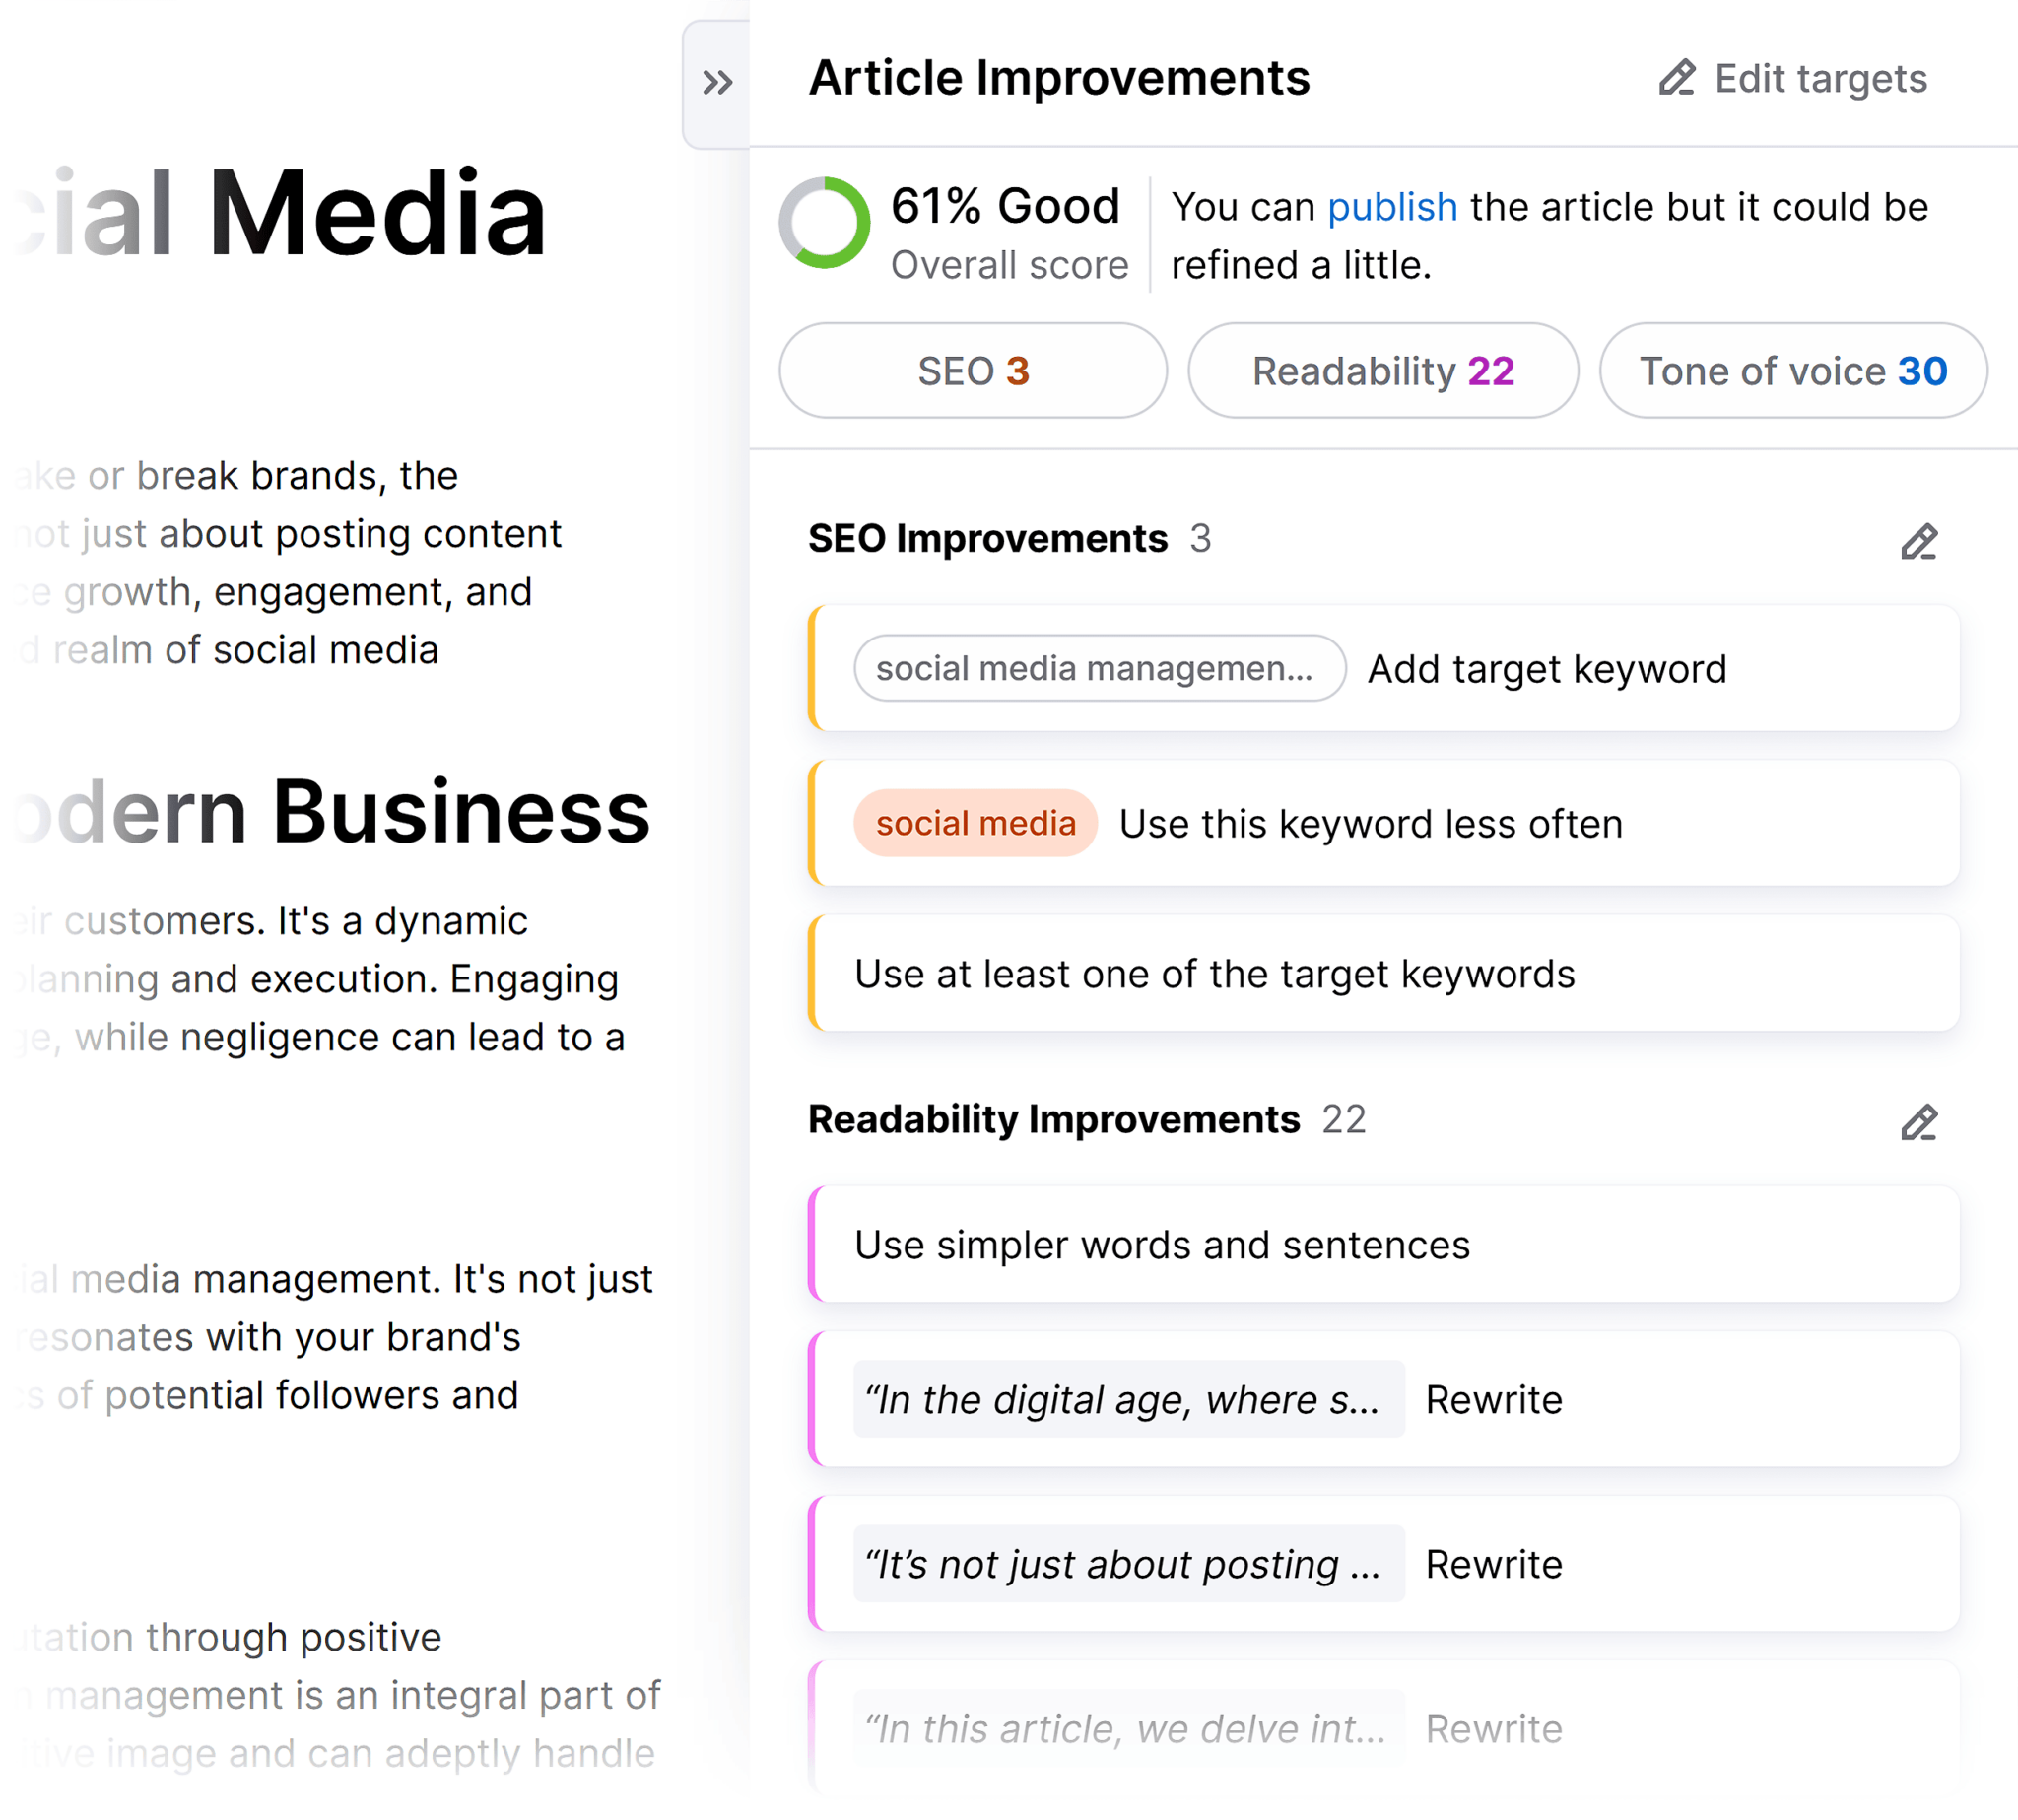 contentshake-article-improvements 29 Top Digital Marketing Tools for Every Budget